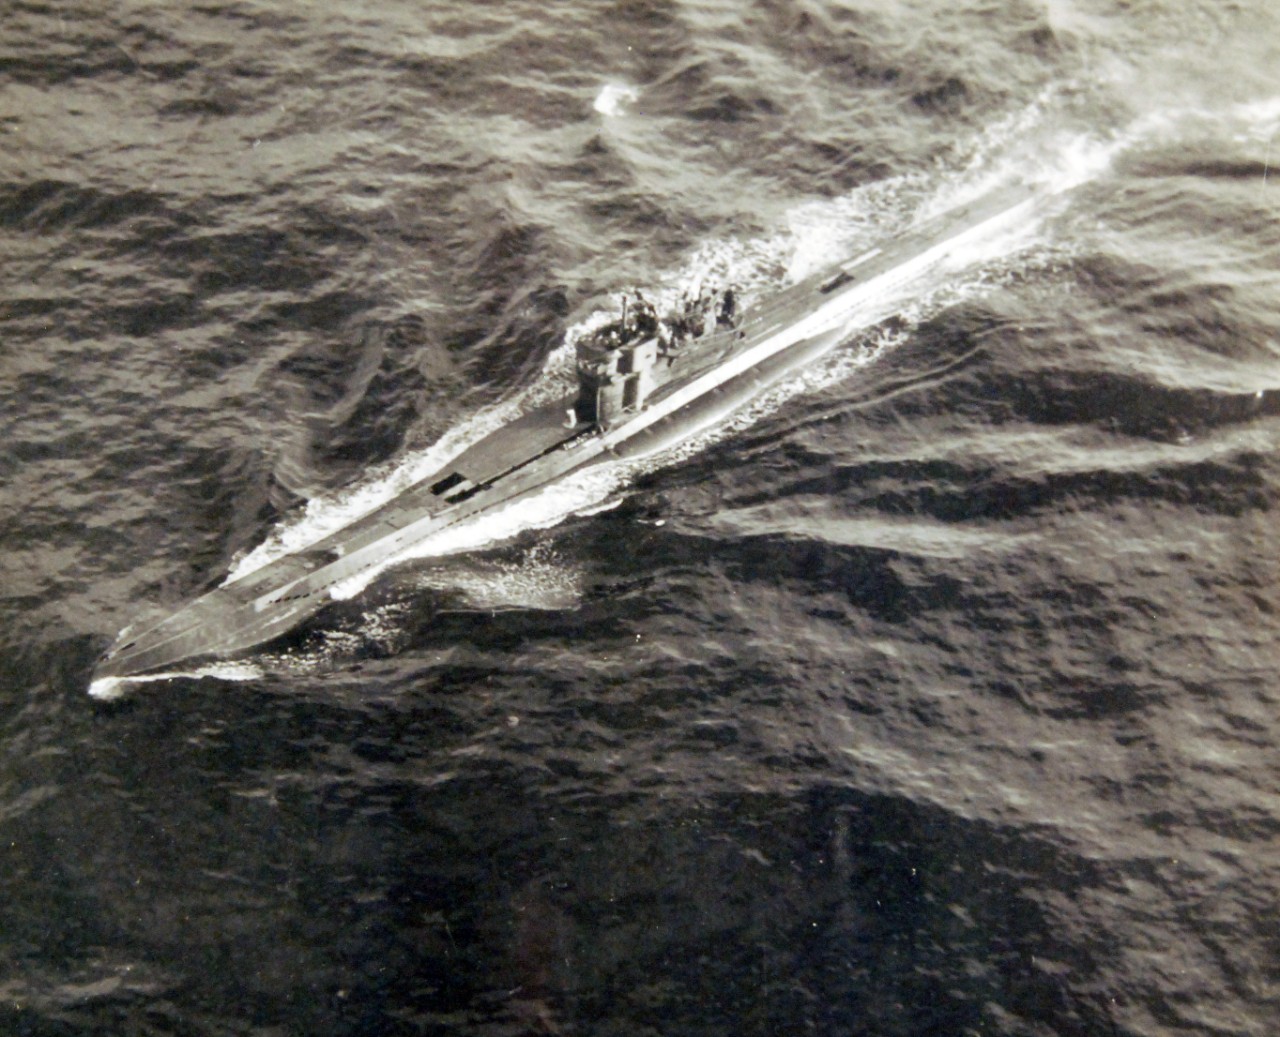 80-G-320285: Surrender of German U-boats, WWII.  U-249 surrendering on May 9, 1945.   U-249 was the first U-boat to surrender after Germany’s surrender.   The submarine surrendered to a PB4Y-1 “Liberator” from FAW-7 off Scilly Islands.  Official U.S. Navy photograph, now in the collections of the National Archives.  (2017/07/18).